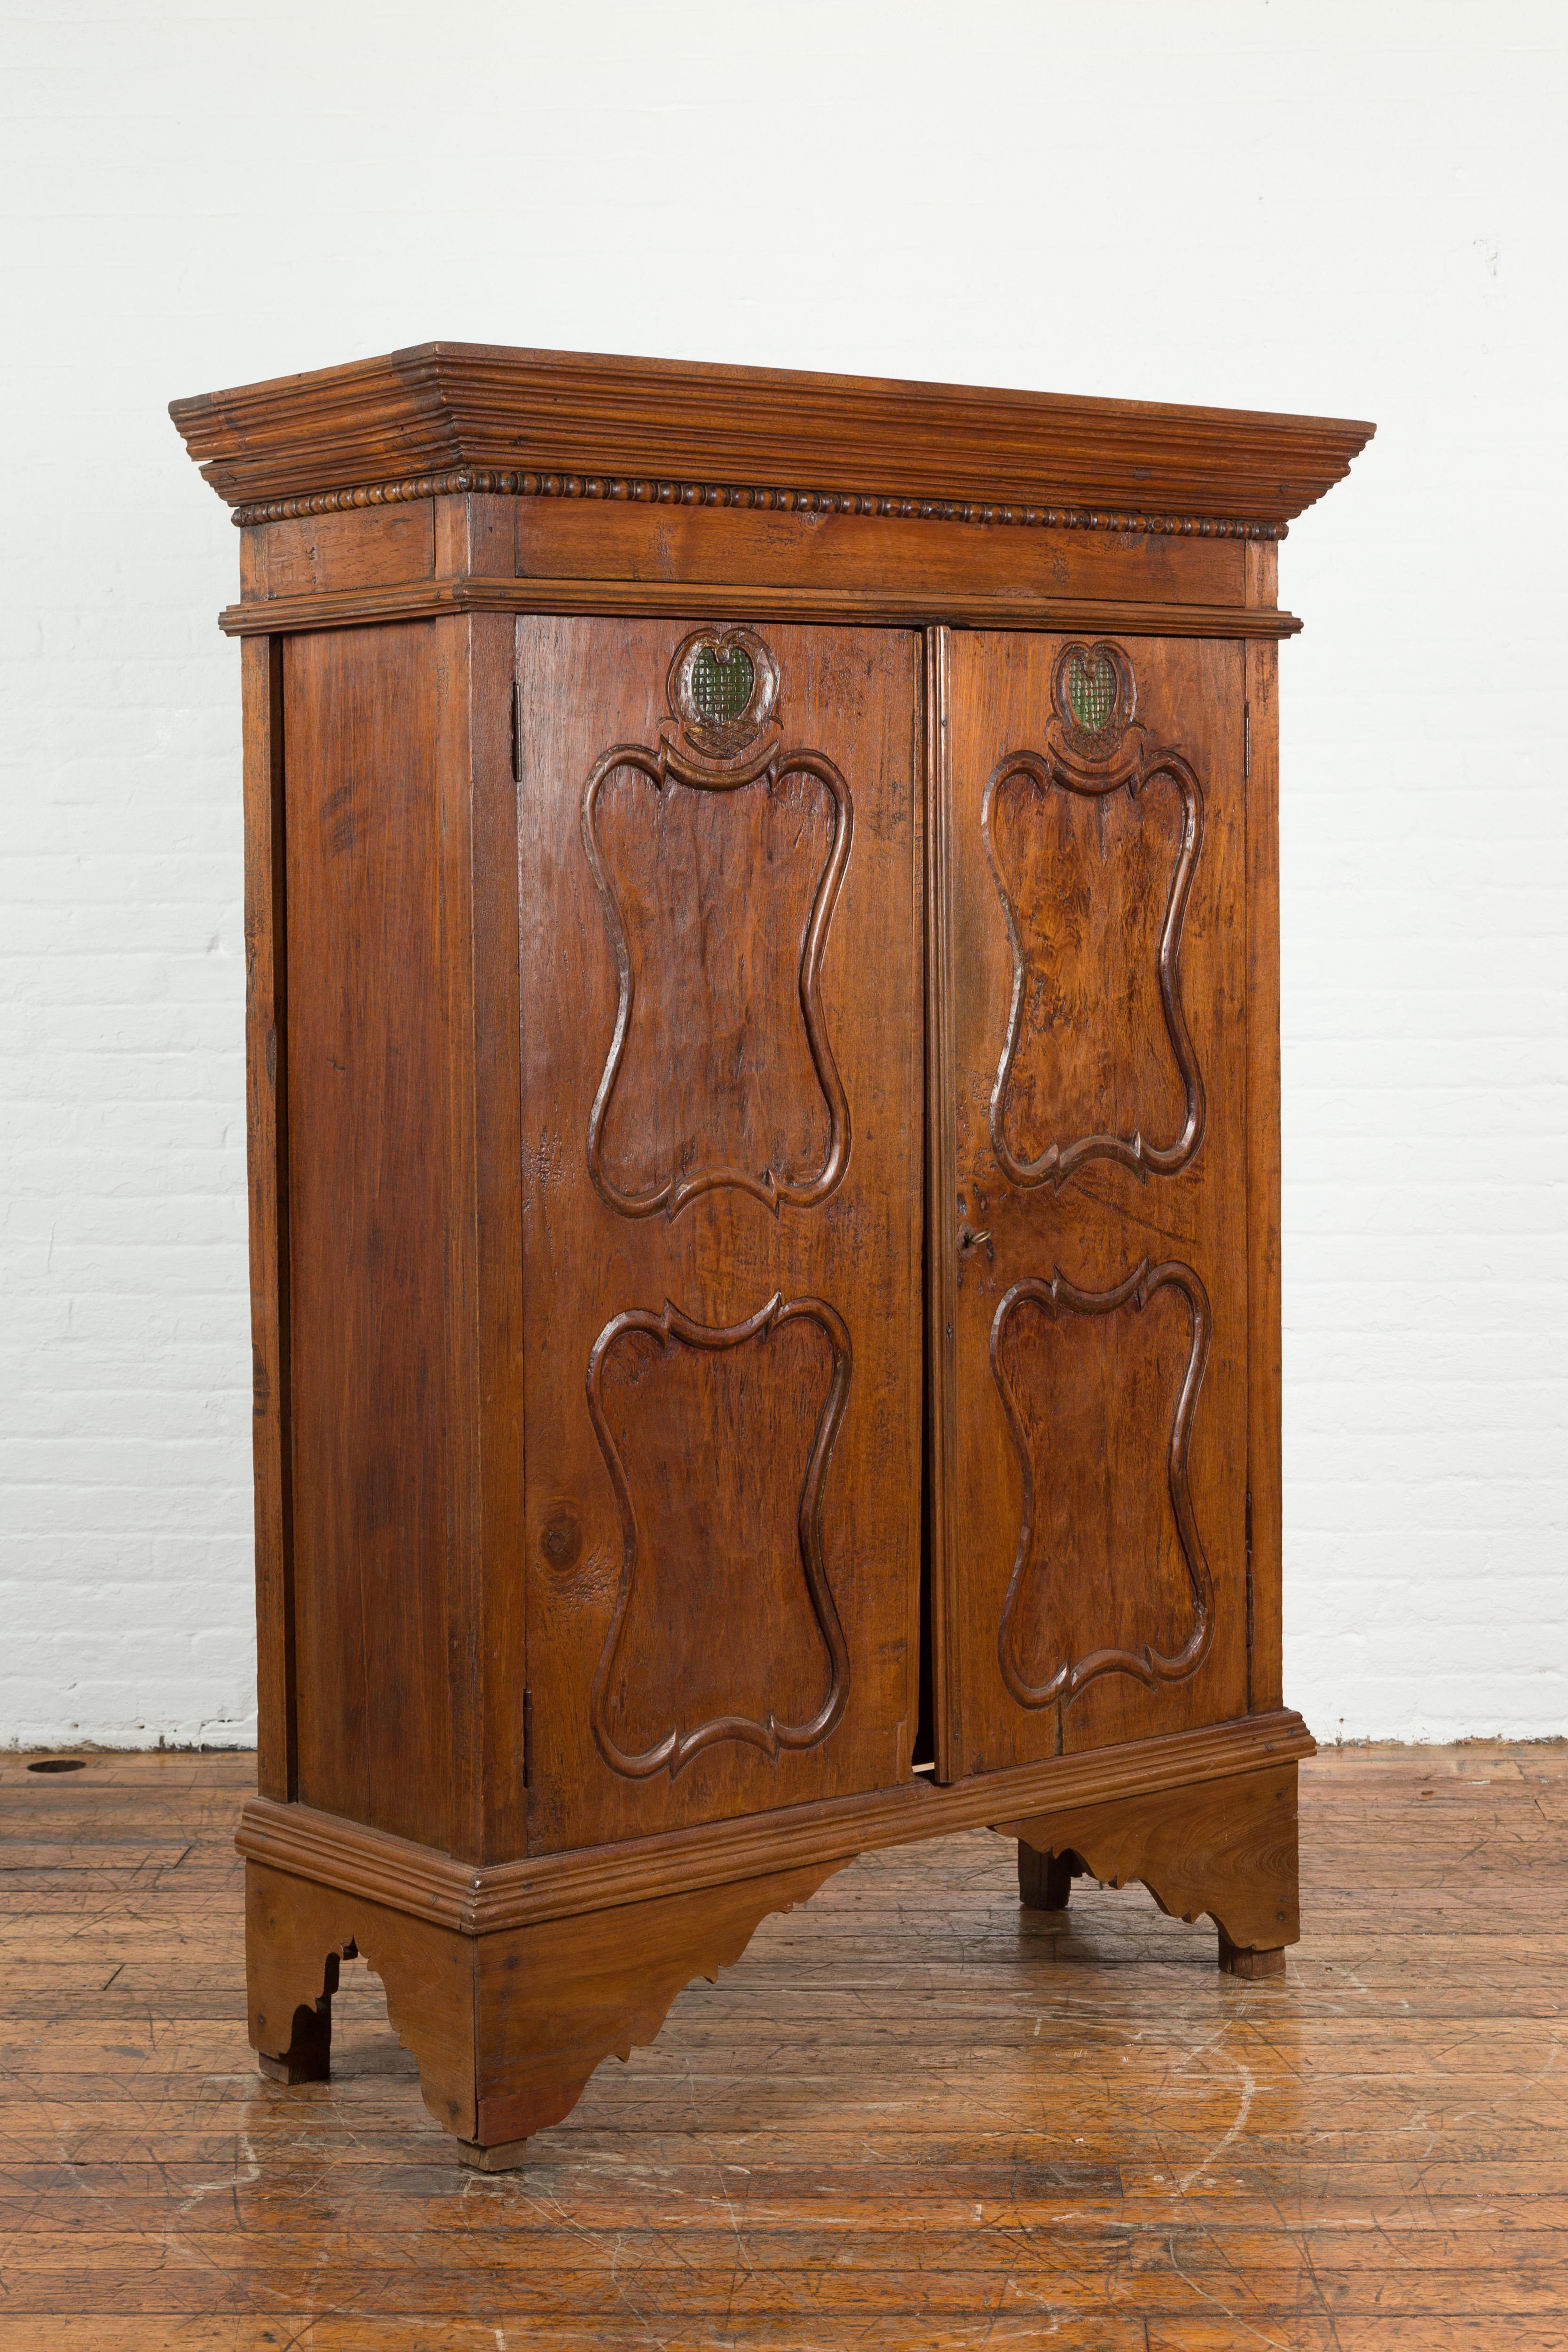 Indonesian Early 20th Century Carved Teak Wood Cabinet with Molded Cartouches In Good Condition For Sale In Yonkers, NY